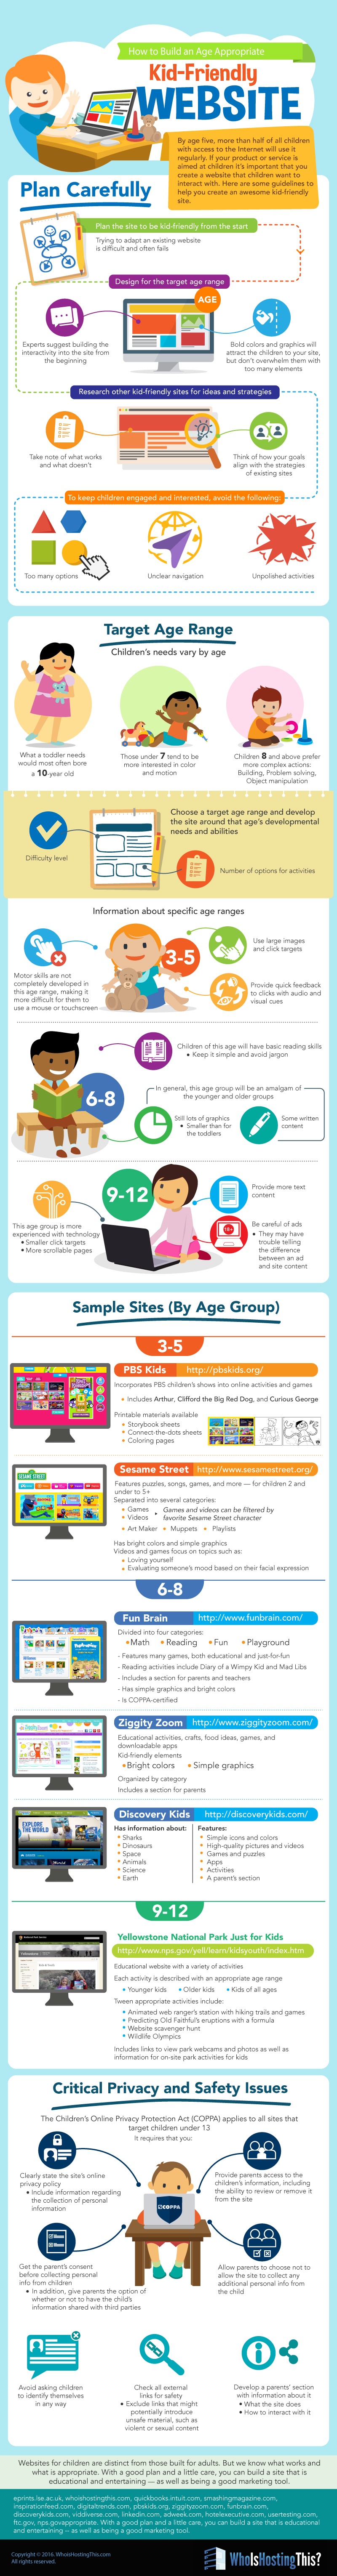 How to Build an Age Appropriate Kid-Friendly Website Infographic